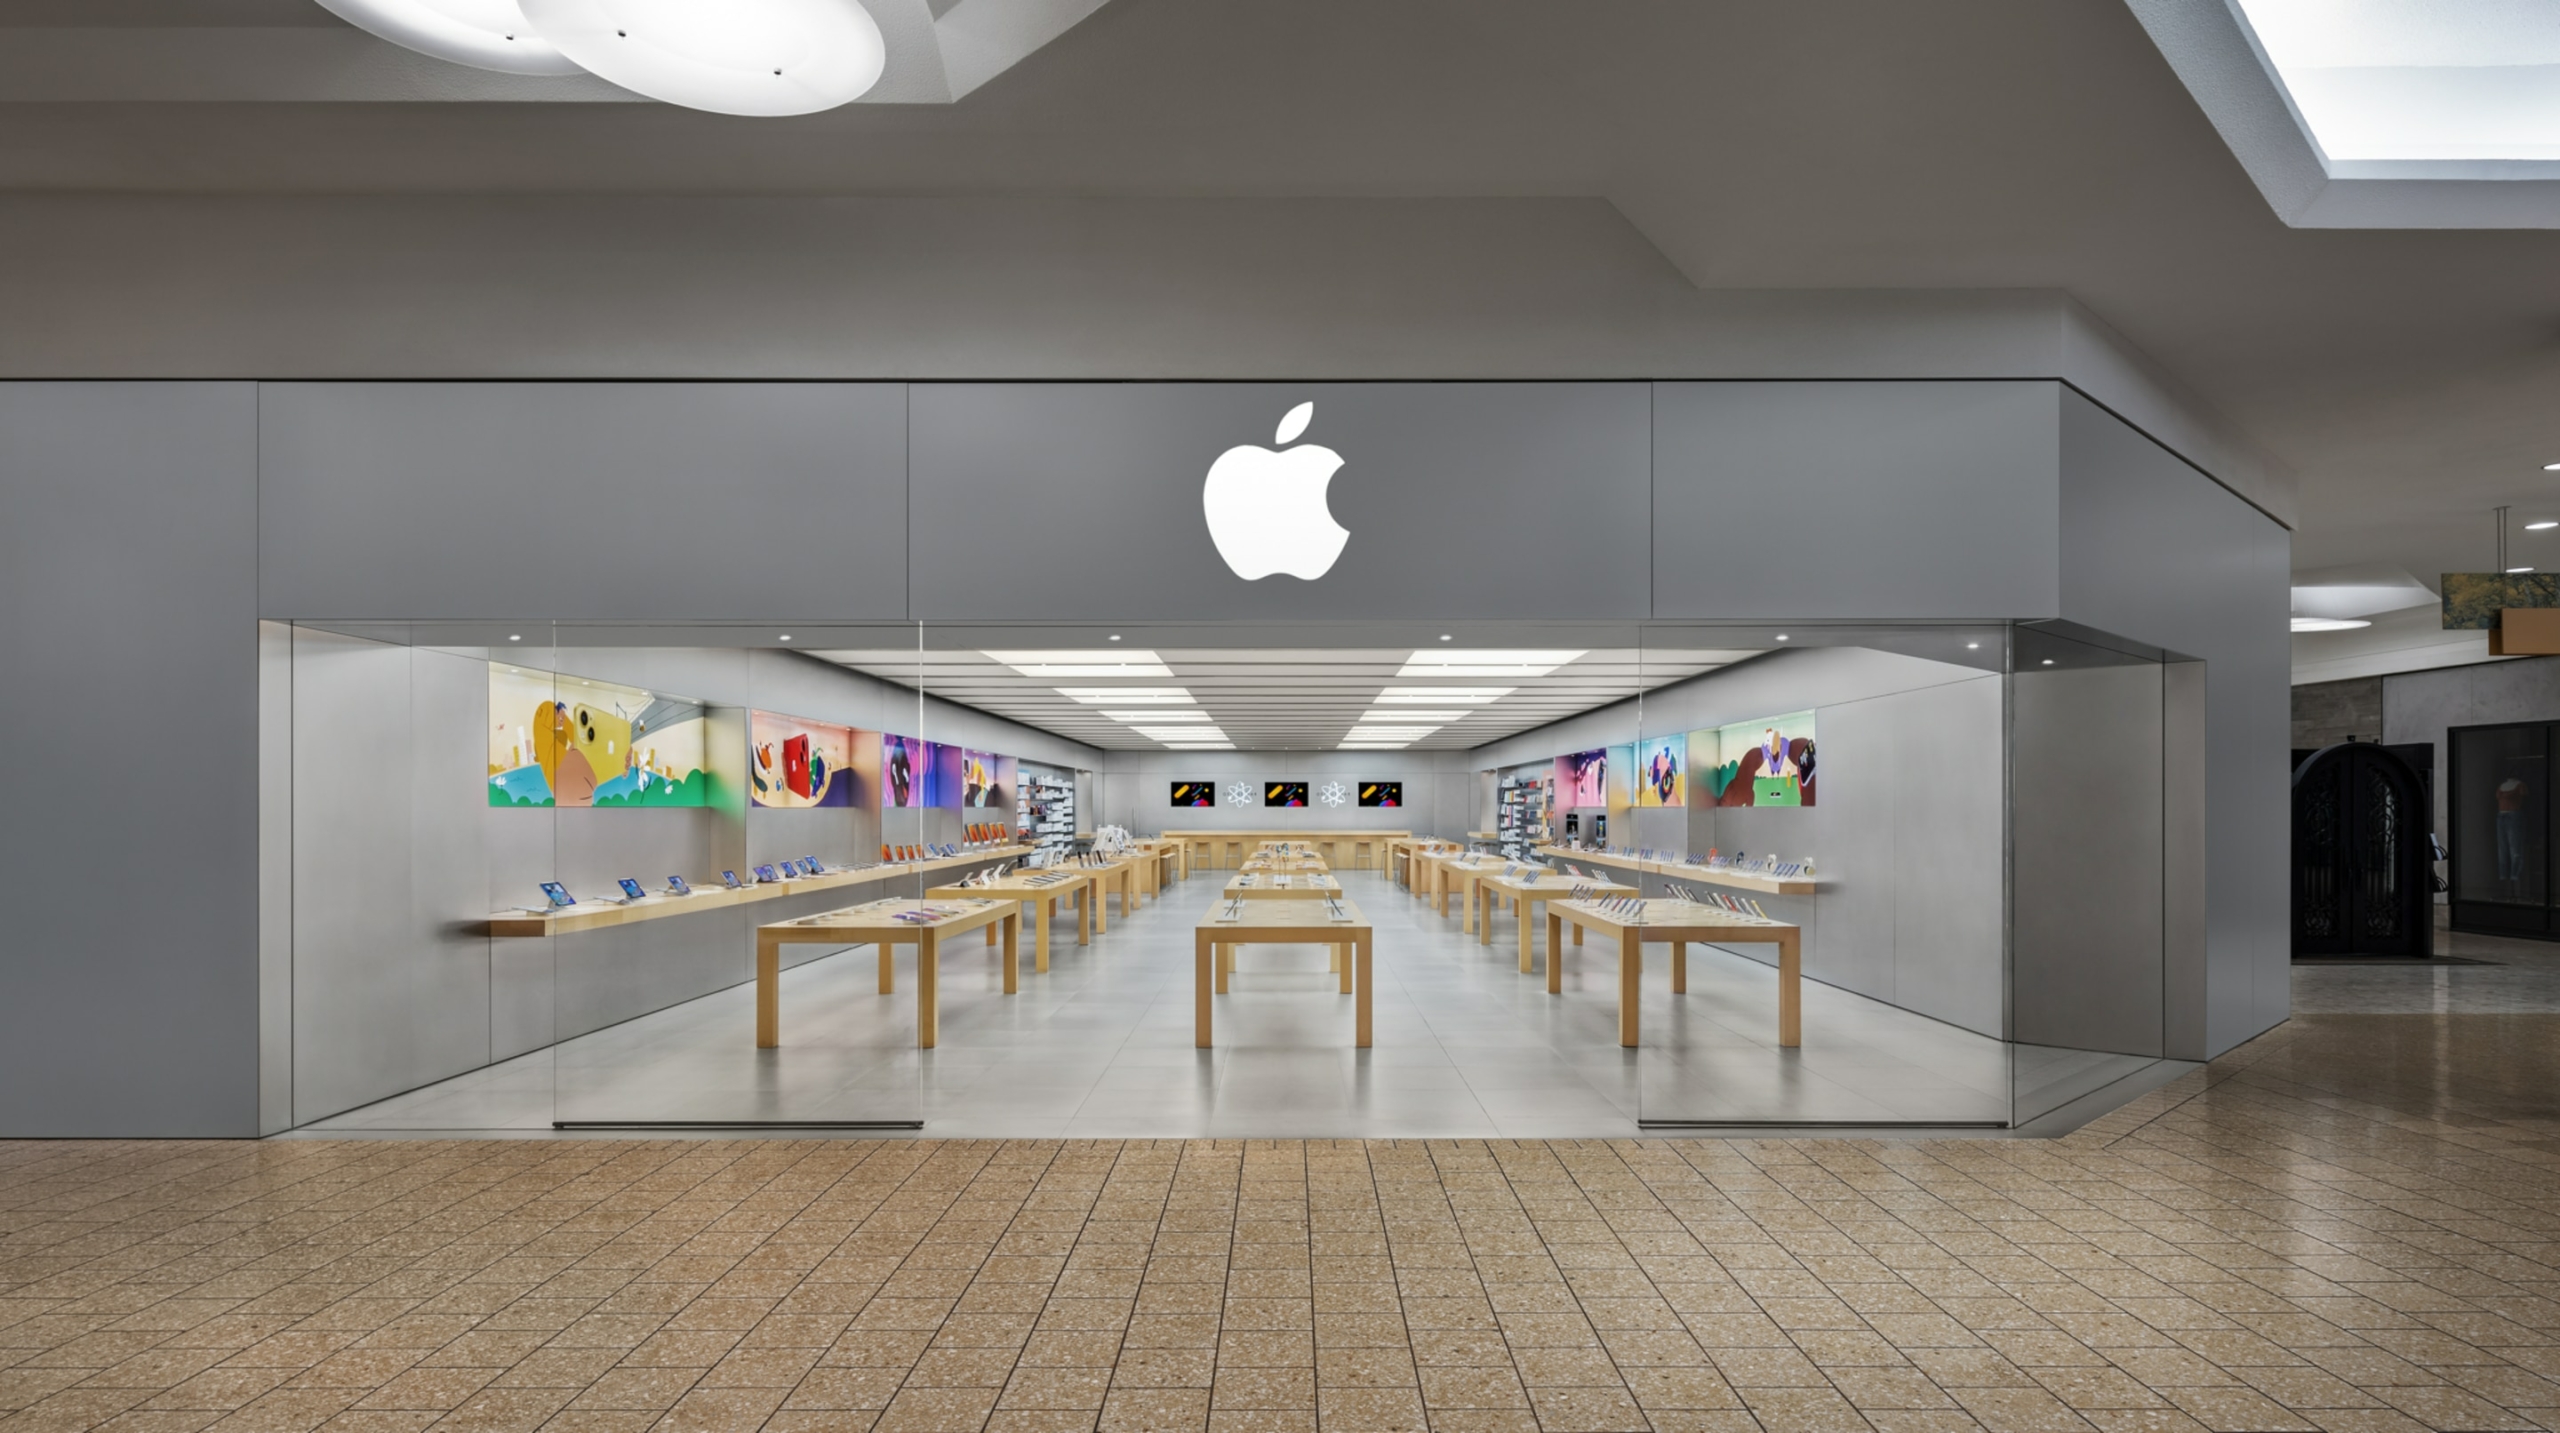 Staff at New Jersey Apple Store File to Unionize